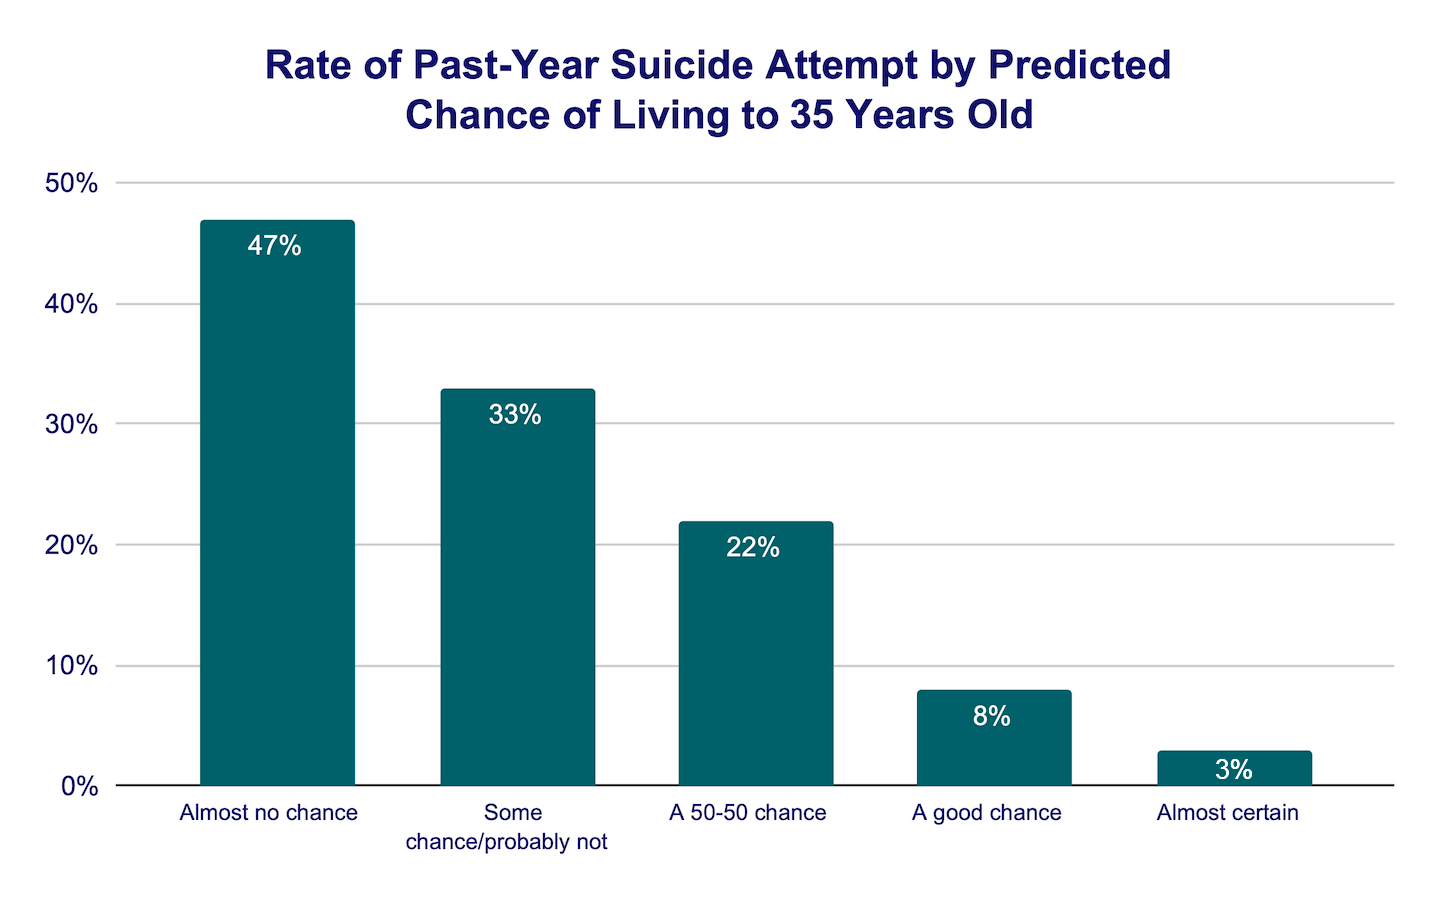 Rate of Past Year Suicide Attempt by Predicted Chance of Living to 35 Years Old